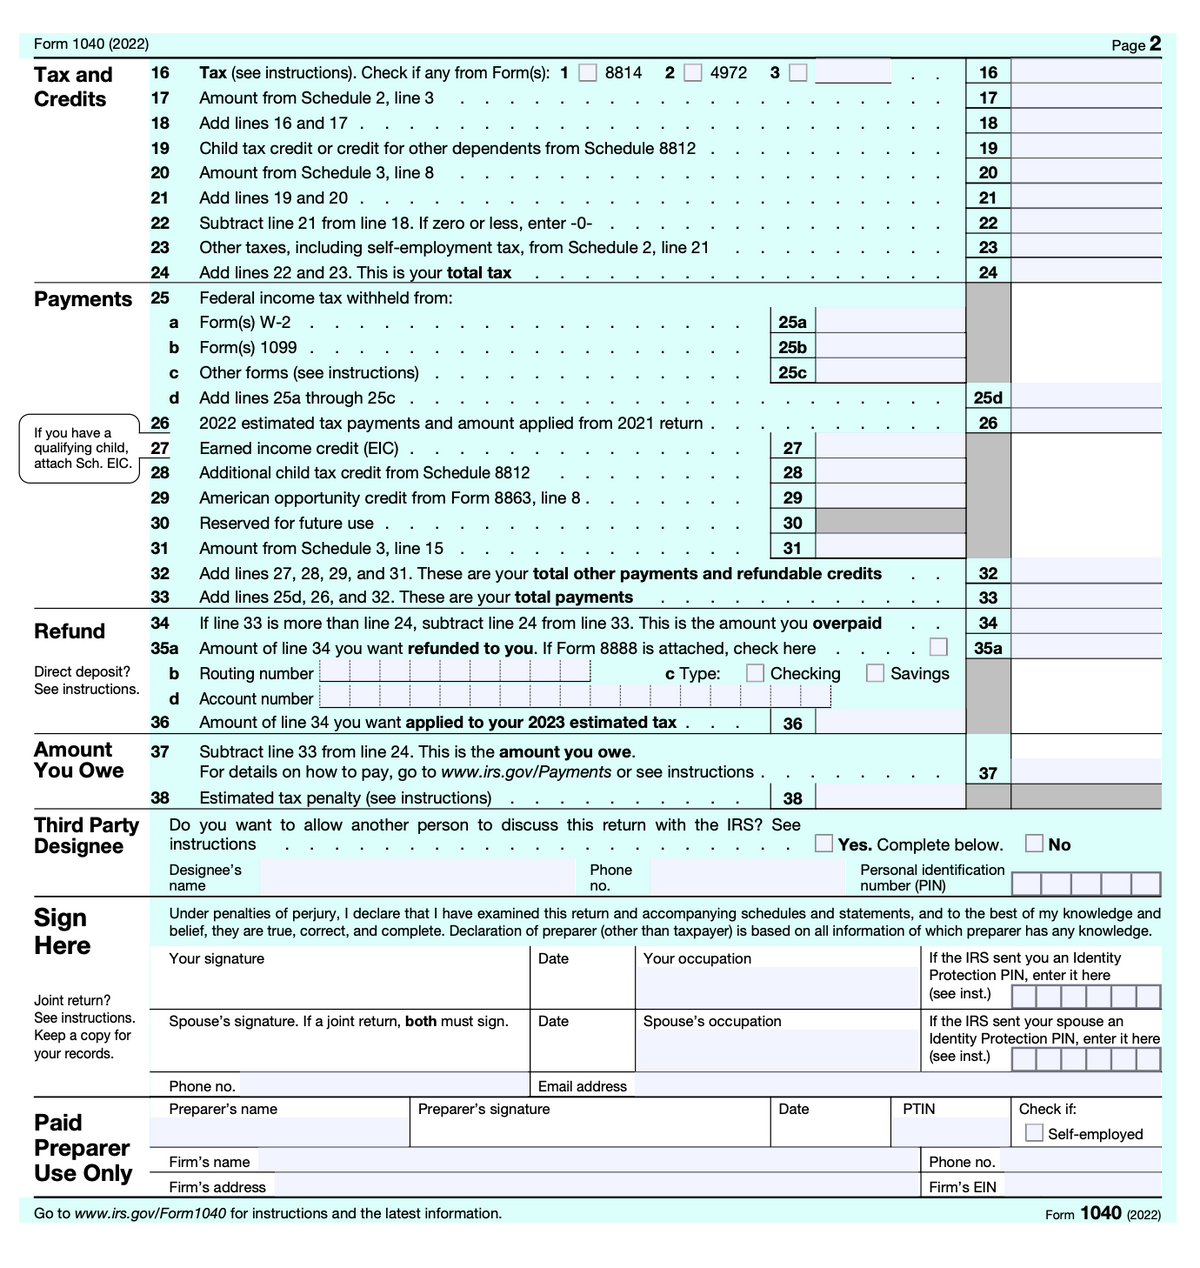 Form 1040 (2022)
Tax and
Credits
16
17
18
19
20
21
22
23
24
Payments 25
If you have a
qualifying child,
attach Sch. EIC.
Refund
Direct deposit?
See instructions.
34
35a
b
d
36
Amount 37
You Owe
Third Party
Designee
Sign
Here
Joint return?
See instructions.
Keep a copy for
your records.
Paid
Preparer
Use Only
a
Form(s) W-2
b Form(s) 1099
с
d
26
27
28
29
30
31
32
33
Tax (see instructions). Check if any from Form(s): 1
Amount from Schedule 2, line 3
Add lines 16 and 17.
Child tax credit or credit for other dependents from Schedule 8812
Amount from Schedule 3, line 8
Add lines 19 and 20.
Subtract line 21 from line 18. If zero or less, enter -0-
Other taxes, including self-employment tax, from Schedule 2, line 21
Add lines 22 and 23. This is your total tax
Federal income tax withheld from:
Other forms (see instructions)
Add lines 25a through 25c.
2022 estimated tax payments and amount applied from 2021 return
Earned income credit (EIC).
Additional child tax credit from Schedule 8812
American opportunity credit from Form 8863, line 8.
Reserved for future use.
Subtract line 33 from line 24. This is the amount you owe.
For details on how to pay, go to www.irs.gov/Payments or see instructions.
Estimated tax penalty (see instructions)
Designee's
name
8814 2 4972
Amount from Schedule 3, line 15
Add lines 27, 28, 29, and 31. These are your total other payments and refundable credits
Add lines 25d, 26, and 32. These are your total payments
If line 33 is more than line 24, subtract line 24 from line 33. This is the amount you overpaid
Amount of line 34 you want refunded to you. If Form 8888 is attached, check here
Routing number
c Type:
Checking
Account number
Amount of line 34 you want applied to your 2023 estimated tax
Spouse's signature. If a joint return, both must sign.
Phone no.
Preparer's name
38
38
Do you want to allow another person to discuss this return with the IRS? See
instructions
Date
Firm's name
Firm's address
Go to www.irs.gov/Form 1040 for instructions and the latest information.
Preparer's signature
3
Phone
no.
25a
25b
25c
Email address
27
28
29
30
31
36
Spouse's occupation
Under penalties of perjury, I declare that I have examined this return and accompanying schedules and statements, and to the best of my knowledge and
belief, they are true, correct, and complete. Declaration of preparer (other than taxpayer) is based on all information of which preparer has any knowledge.
Your signature
Your occupation
Date
Savings
Date
16
17
18
19
20
21
22
23
24
25d
26
32
33
34
35a
37
Yes. Complete below. No
Personal identification
number (PIN)
PTIN
If the IRS sent you an Identity
Protection PIN, enter it here
(see inst.)
Page 2
If the IRS sent your spouse an
Identity Protection PIN, enter it here
(see inst.)
Phone no.
Firm's EIN
Check if:
Self-employed
Form 1040 (2022)